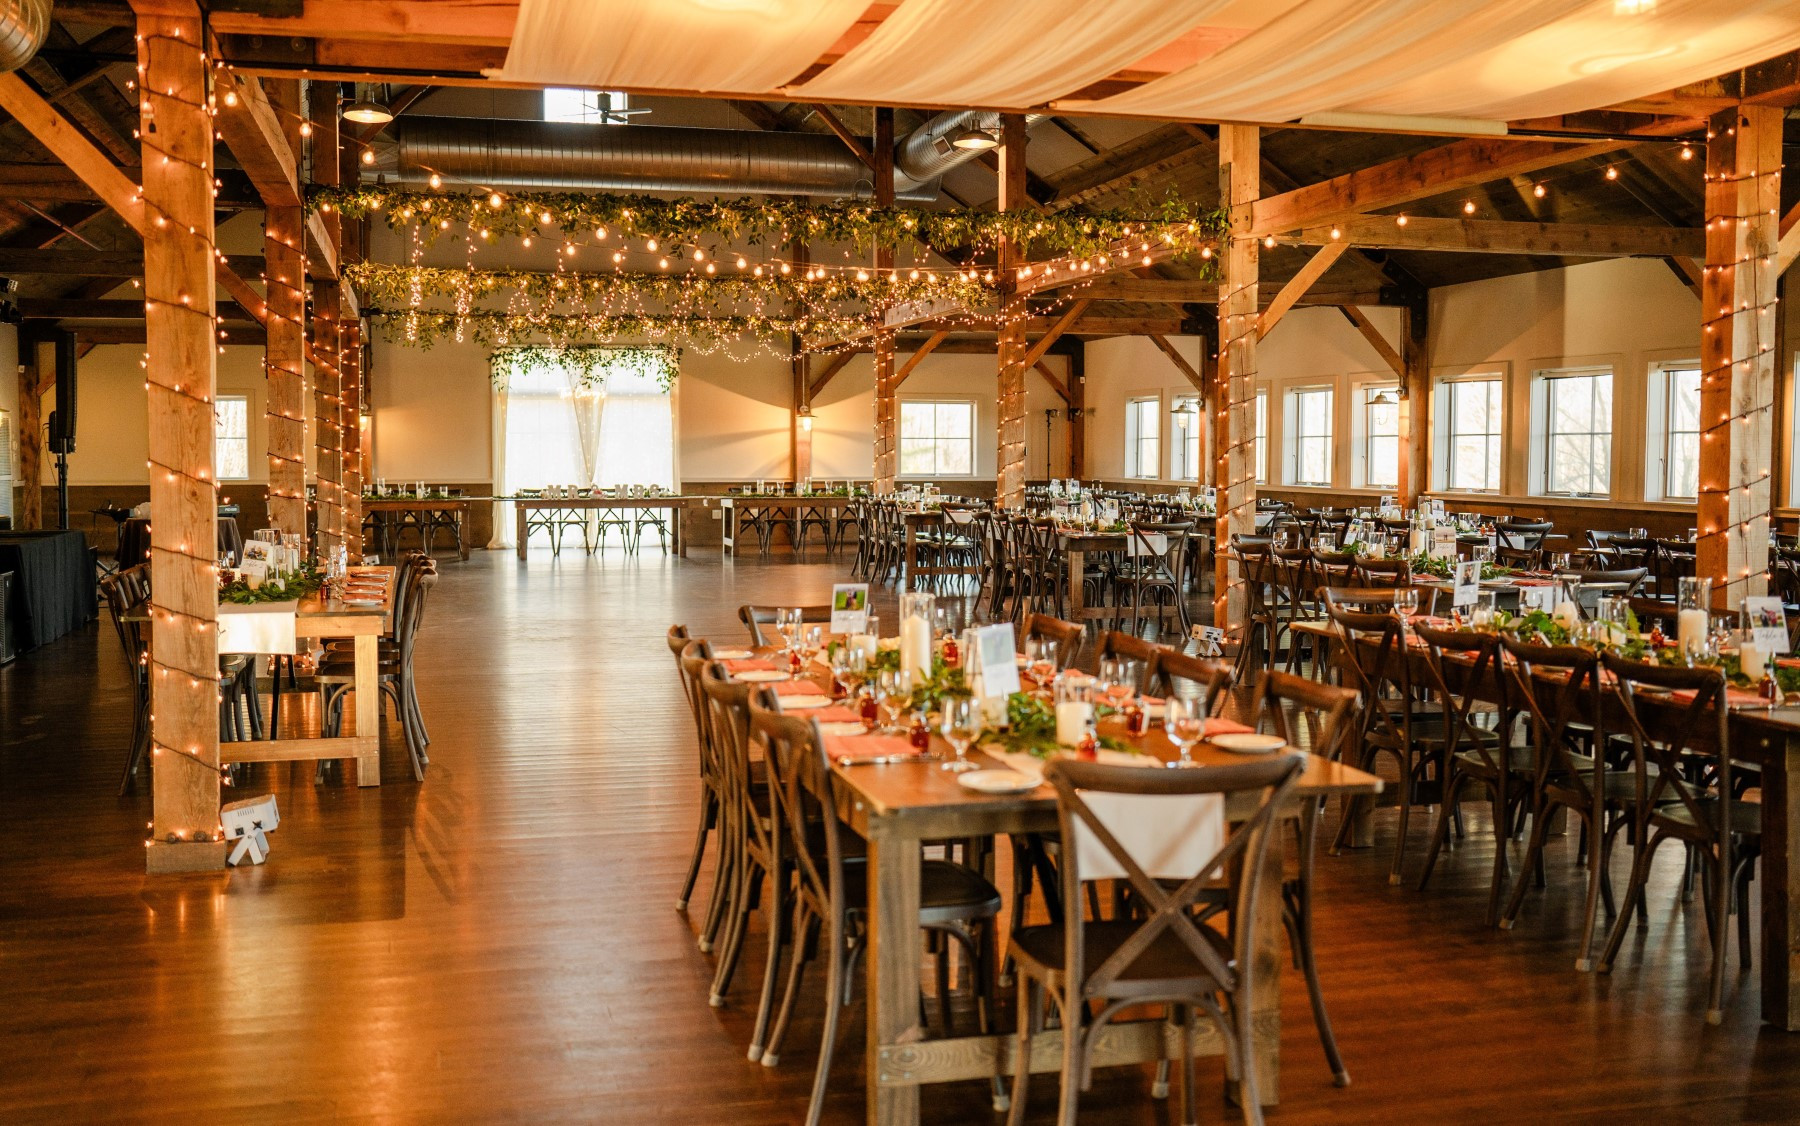 event barn filled with farmhouse tables and chivari chairs with greenery and drapery hanging from rafters.